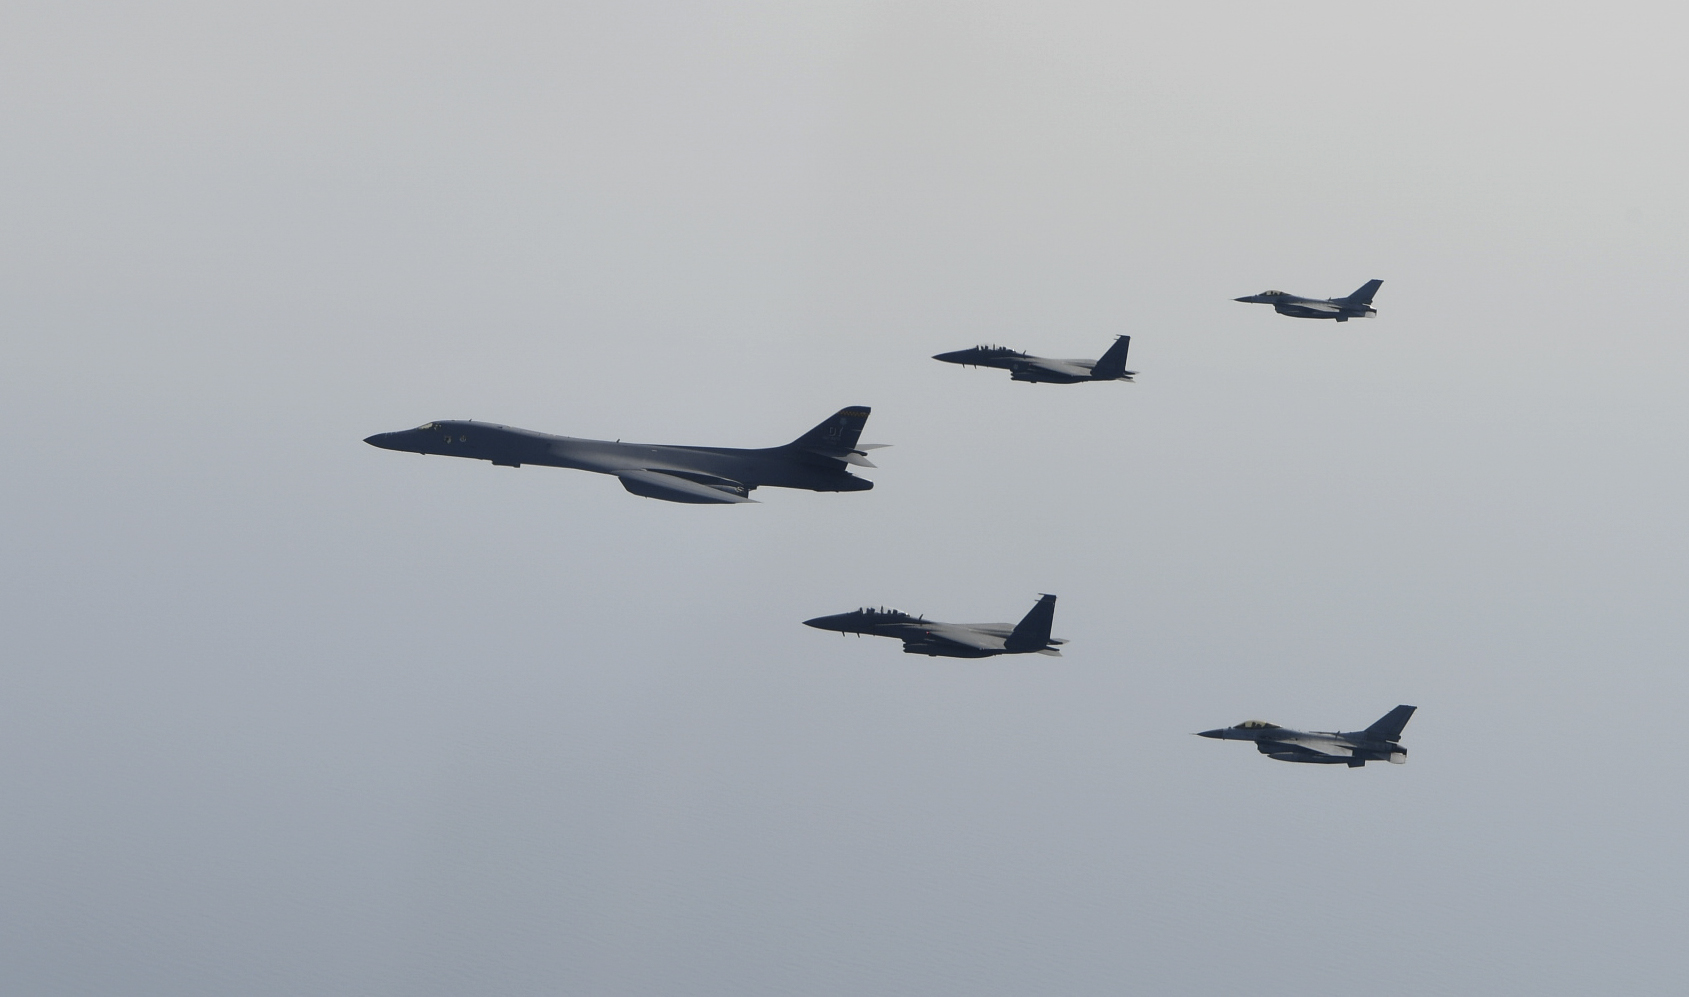 A U.S. Air Force B-1B Lancer flies in formation with Republic of Korea F-15Ks and F-16s in the vicinity of the Republic of Korea March 21, 2017. The sortie was carried out as part of U.S. Pacific Command's continuous bomber presence mission. -